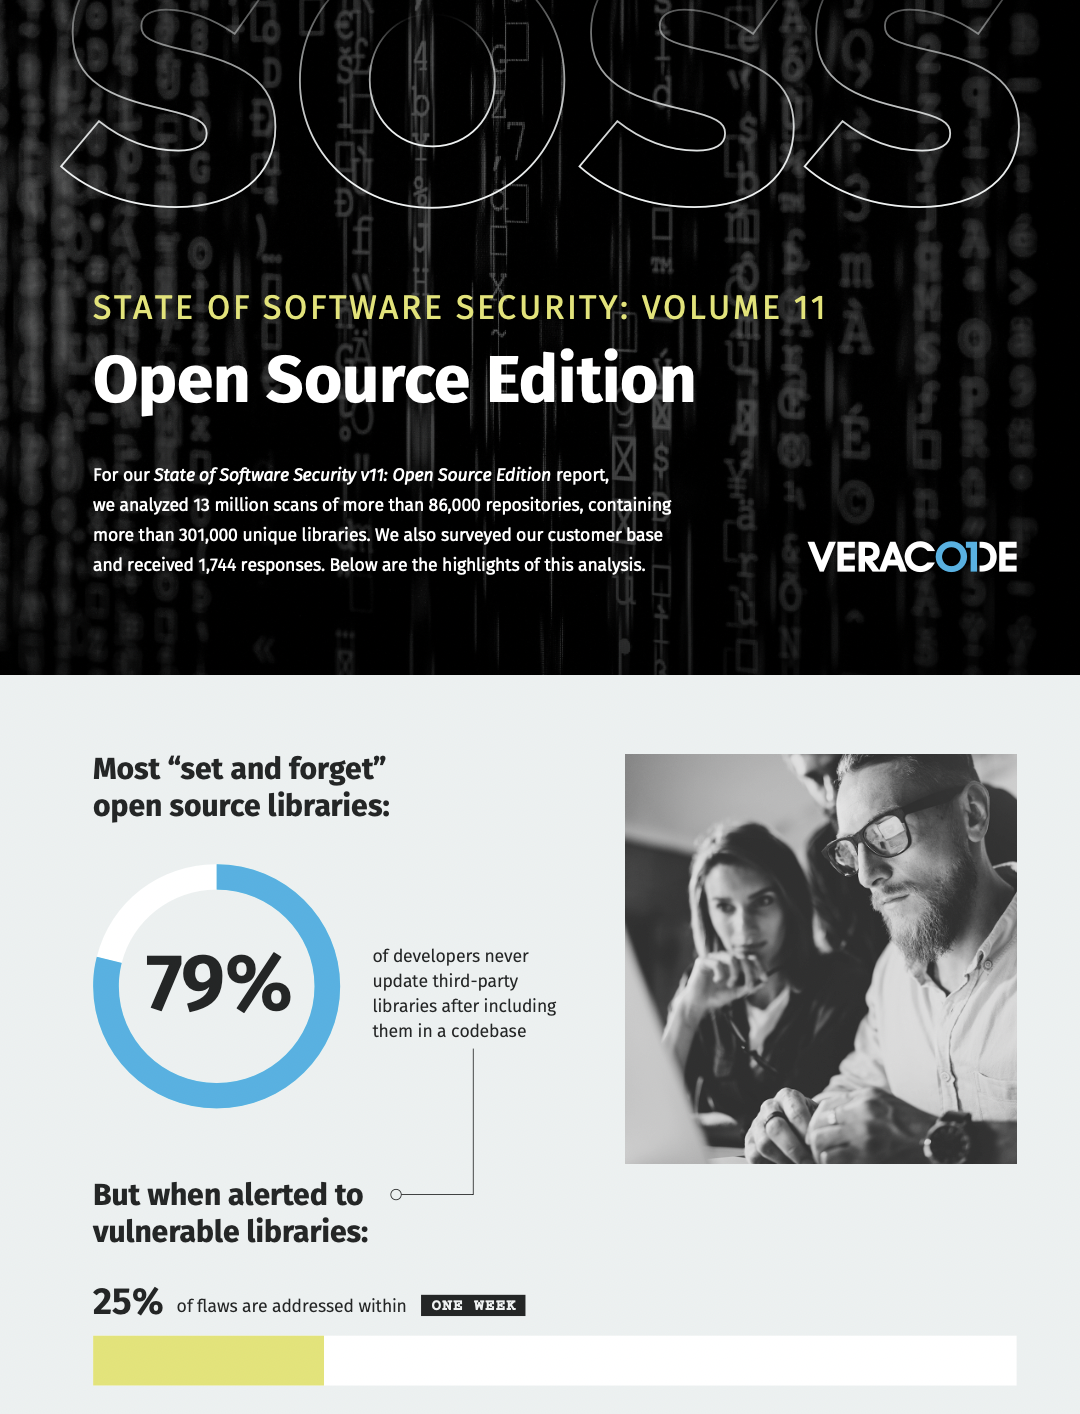 STATE OF SOFTWARE SECURITY: VOLUME 11 Open Source Edition